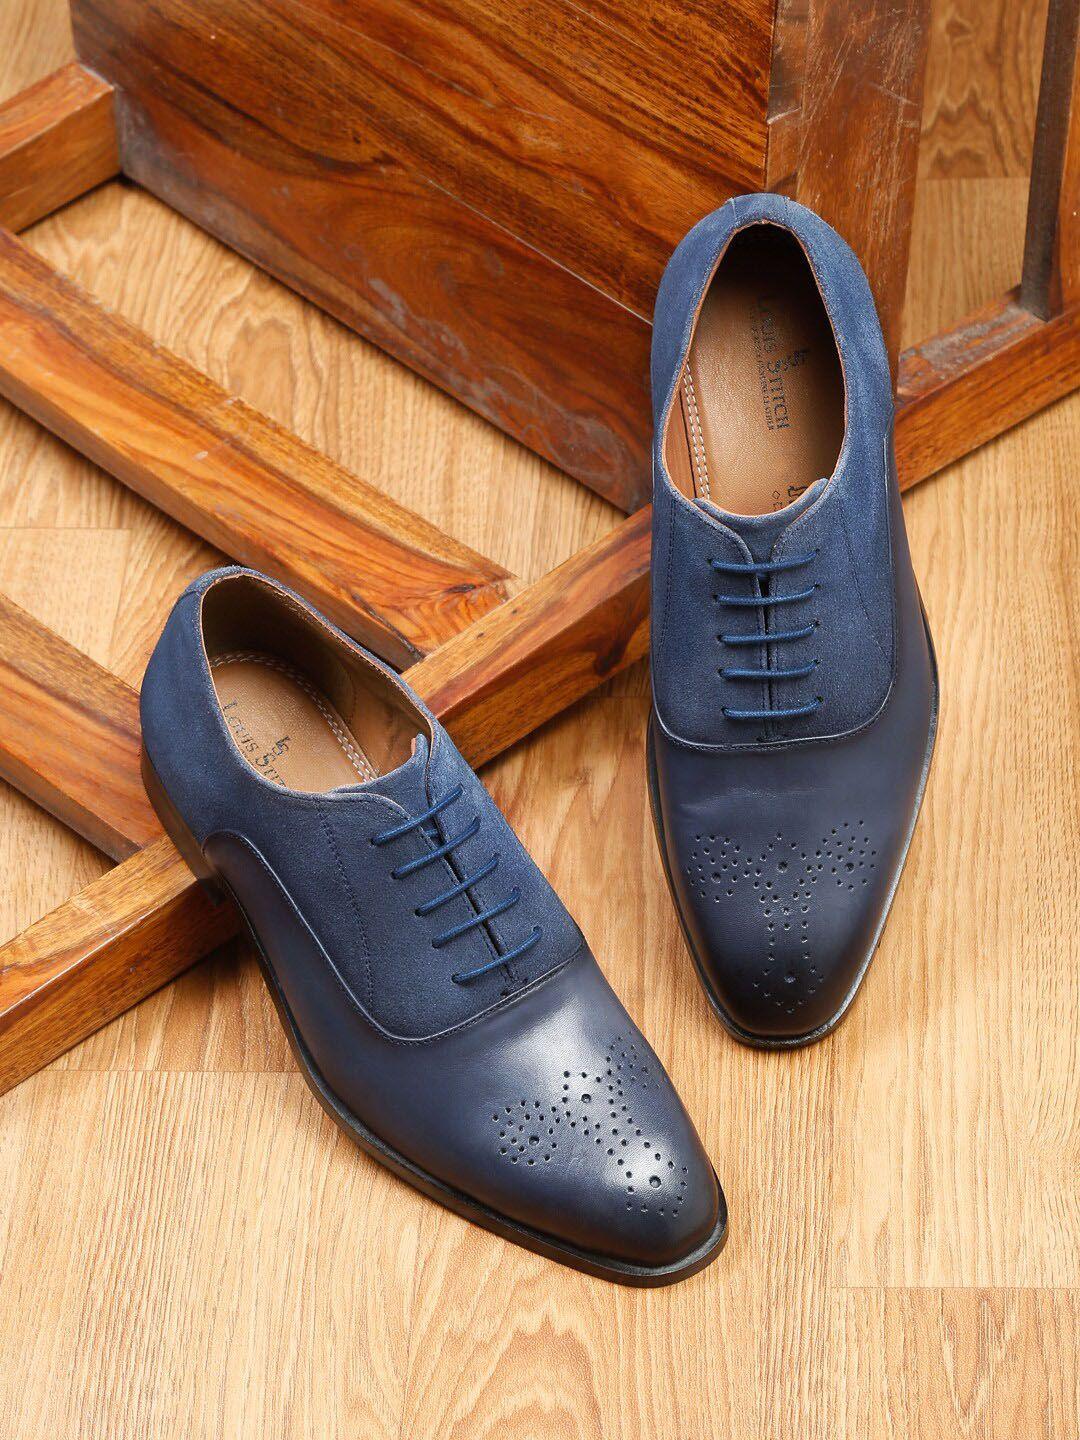 louis-stitch-men-perforated-suede-leather-formal-brogues